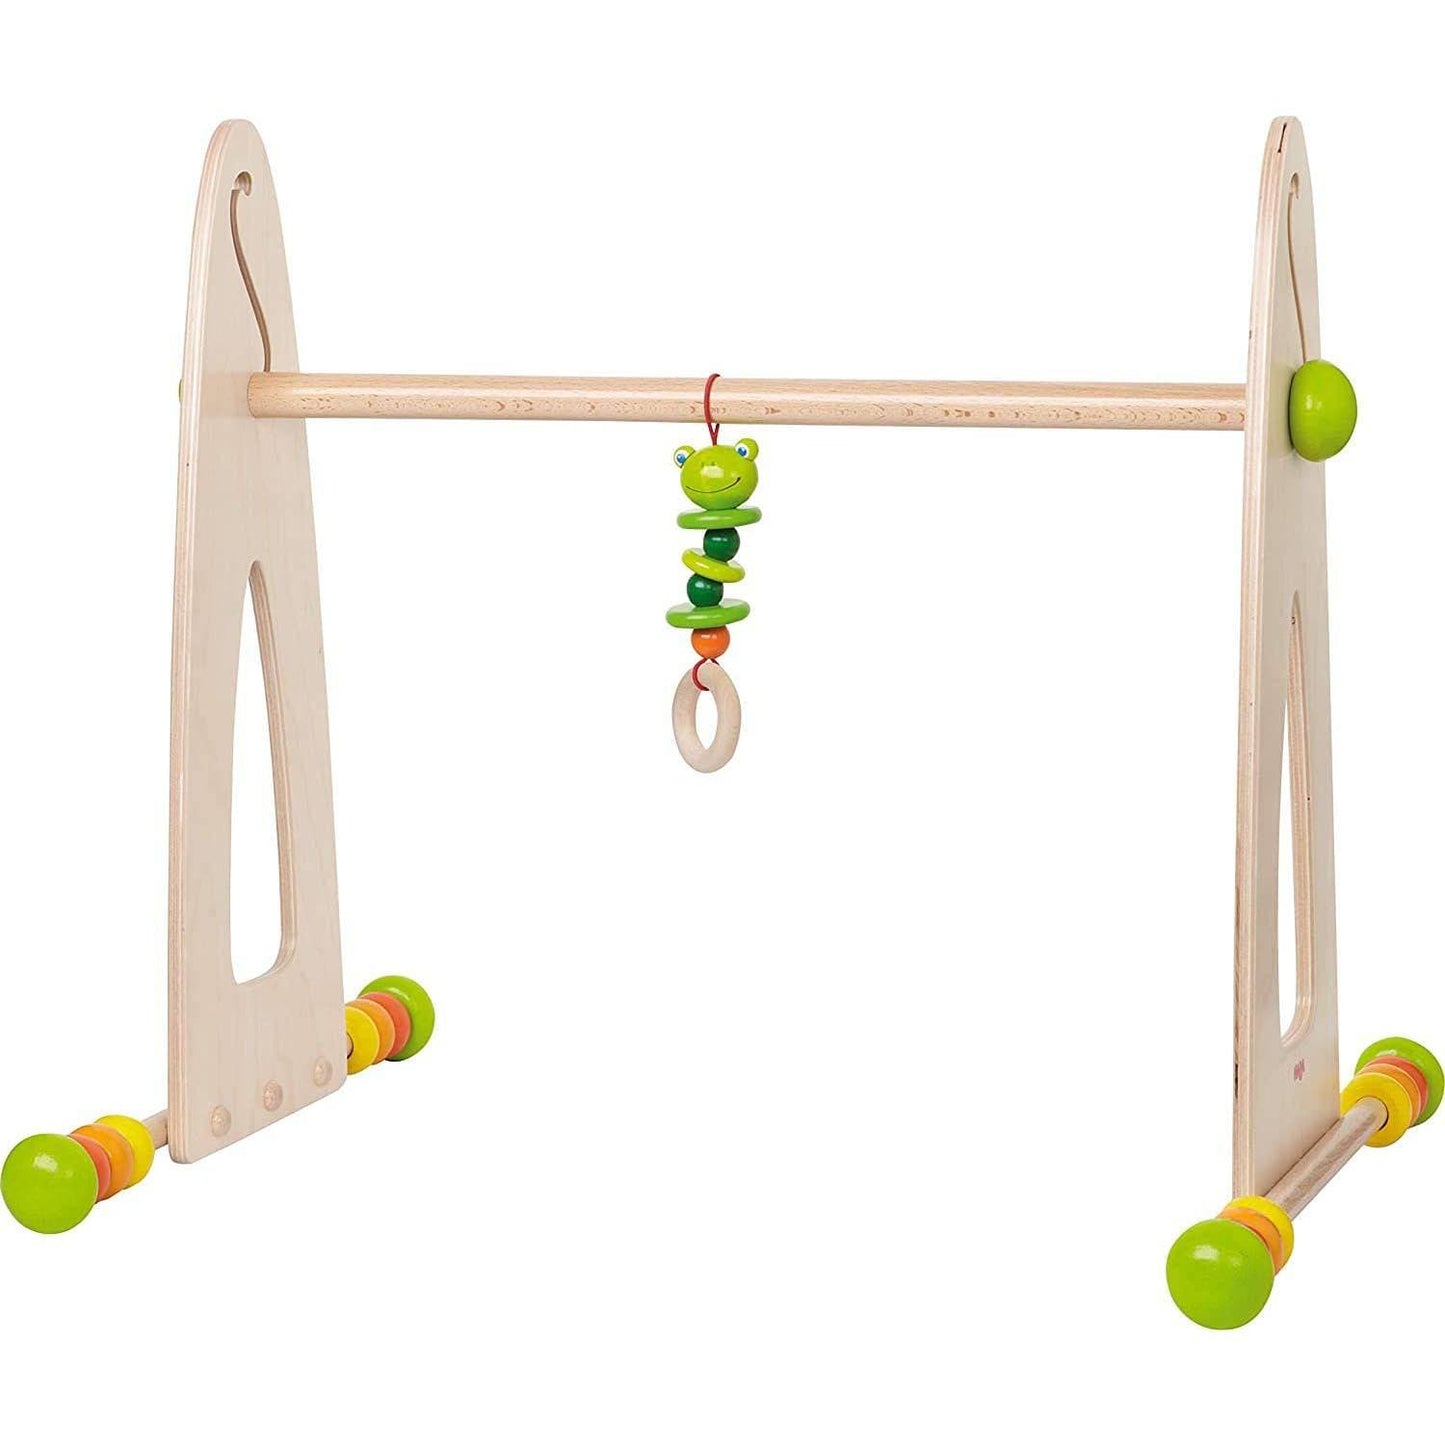 Color Fun Play Gym Activity Center by Haba